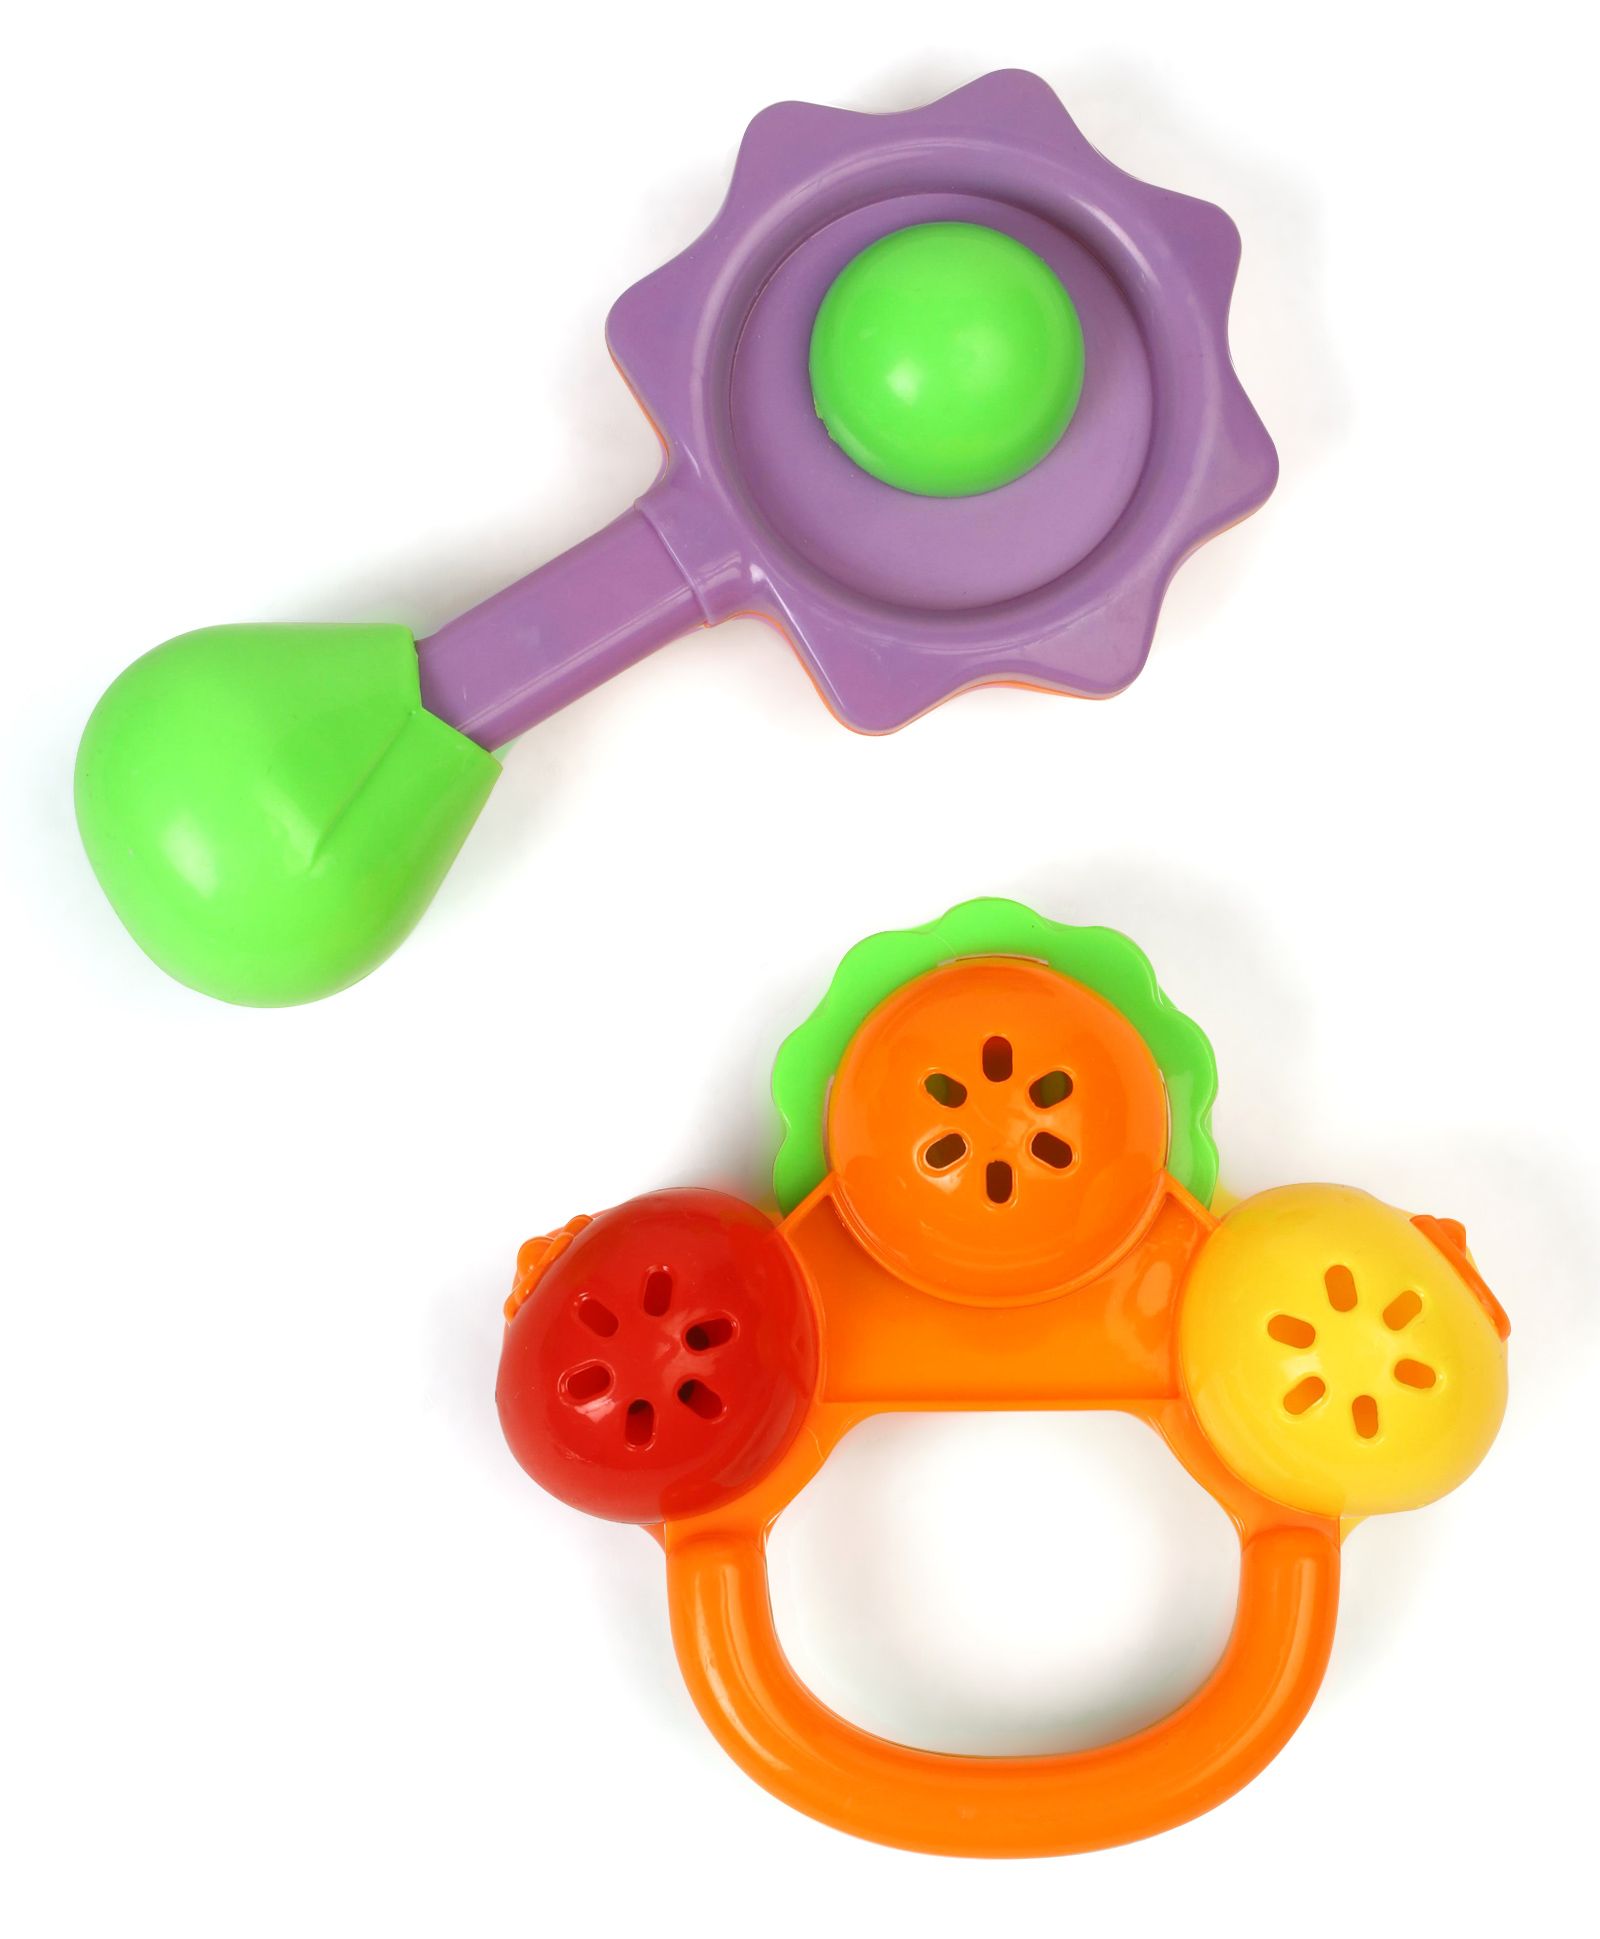 Colorful Baby Rattle Set Play Tool for Babies